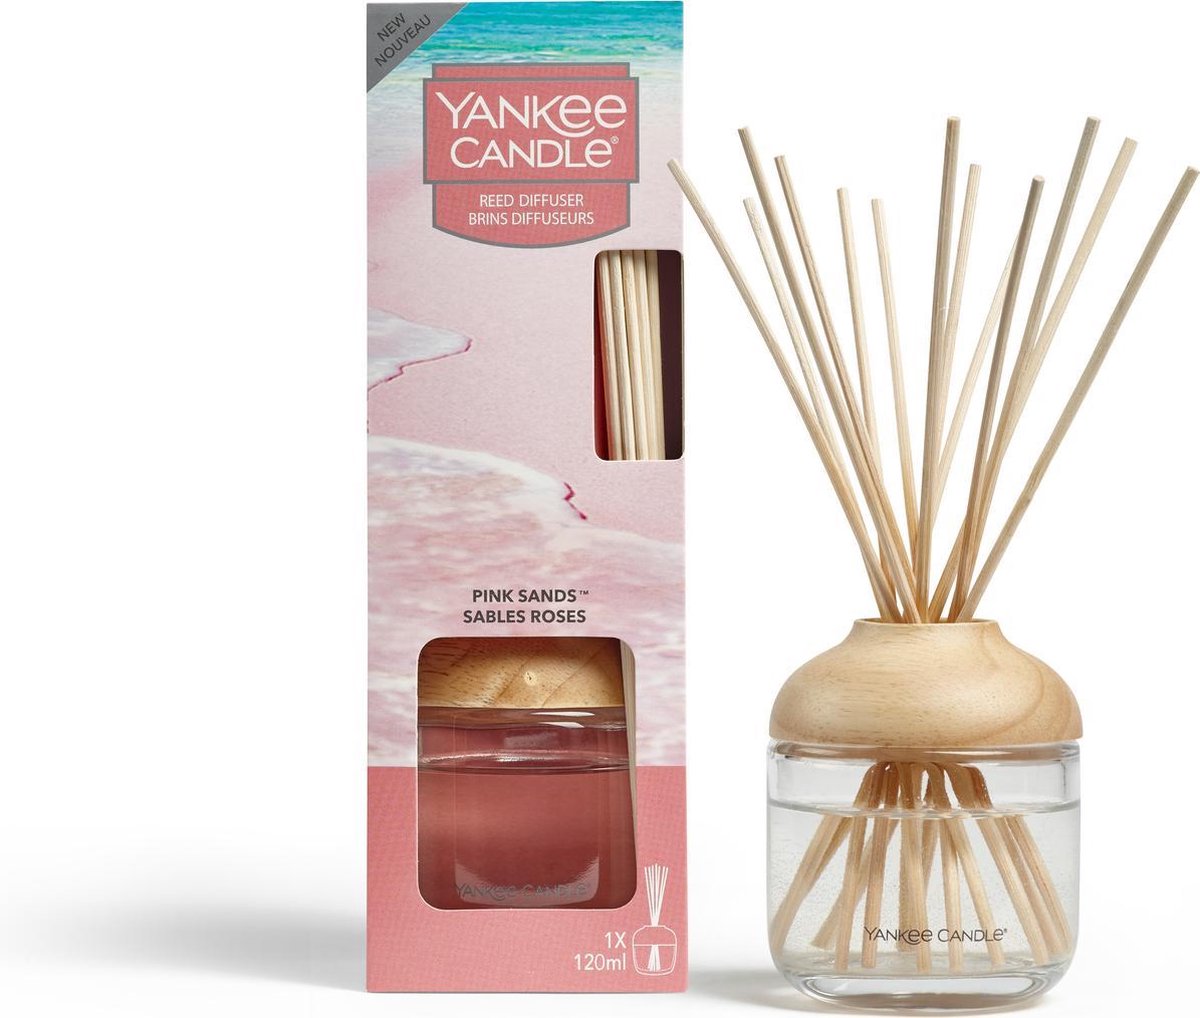 Yankee Candle Reed Diffuser 120 ml - Pink Sands